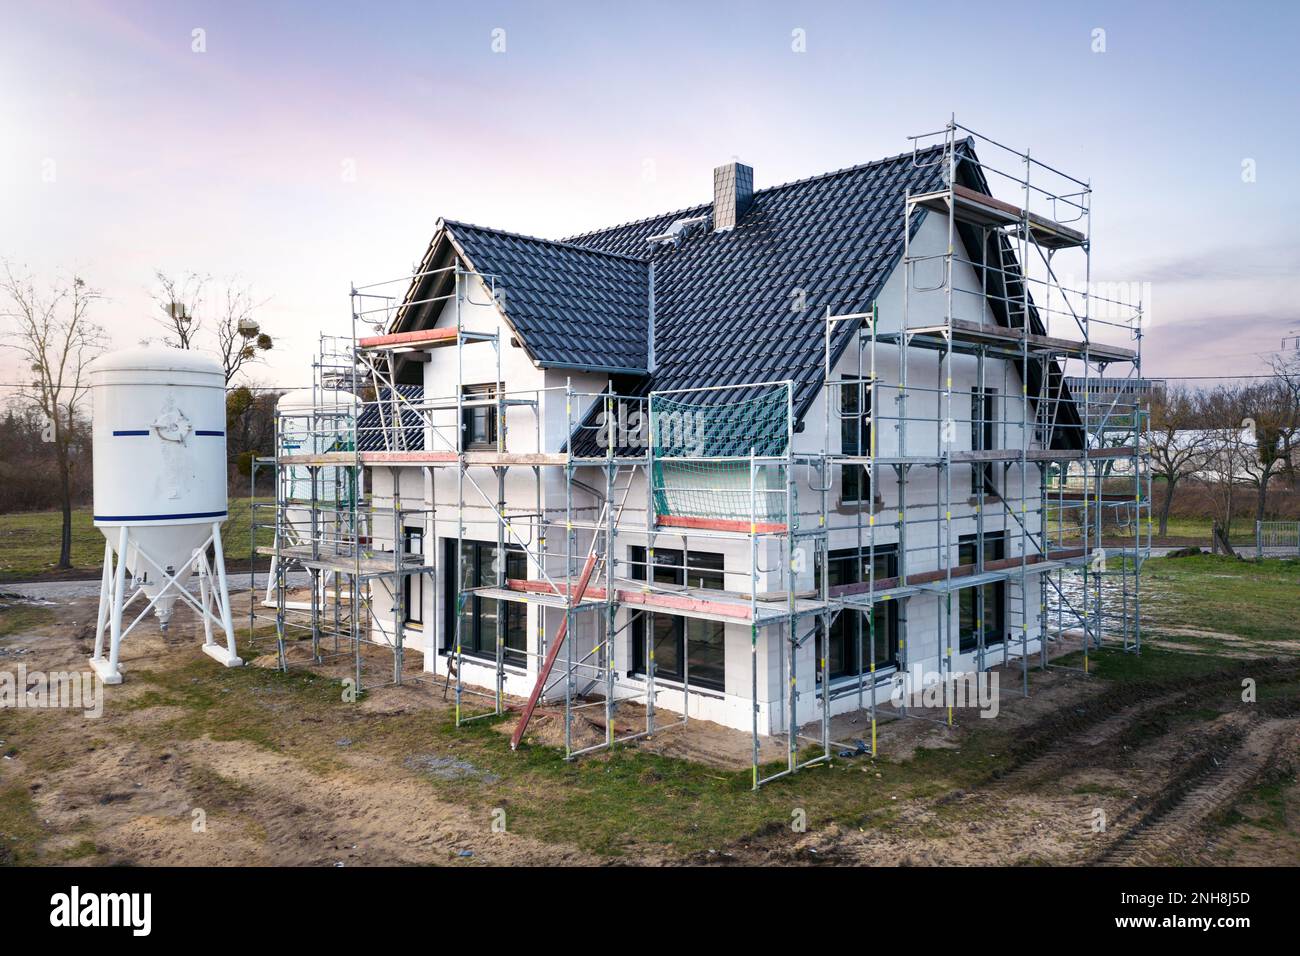 Construction site of a single-family house in Germany Stock Photo